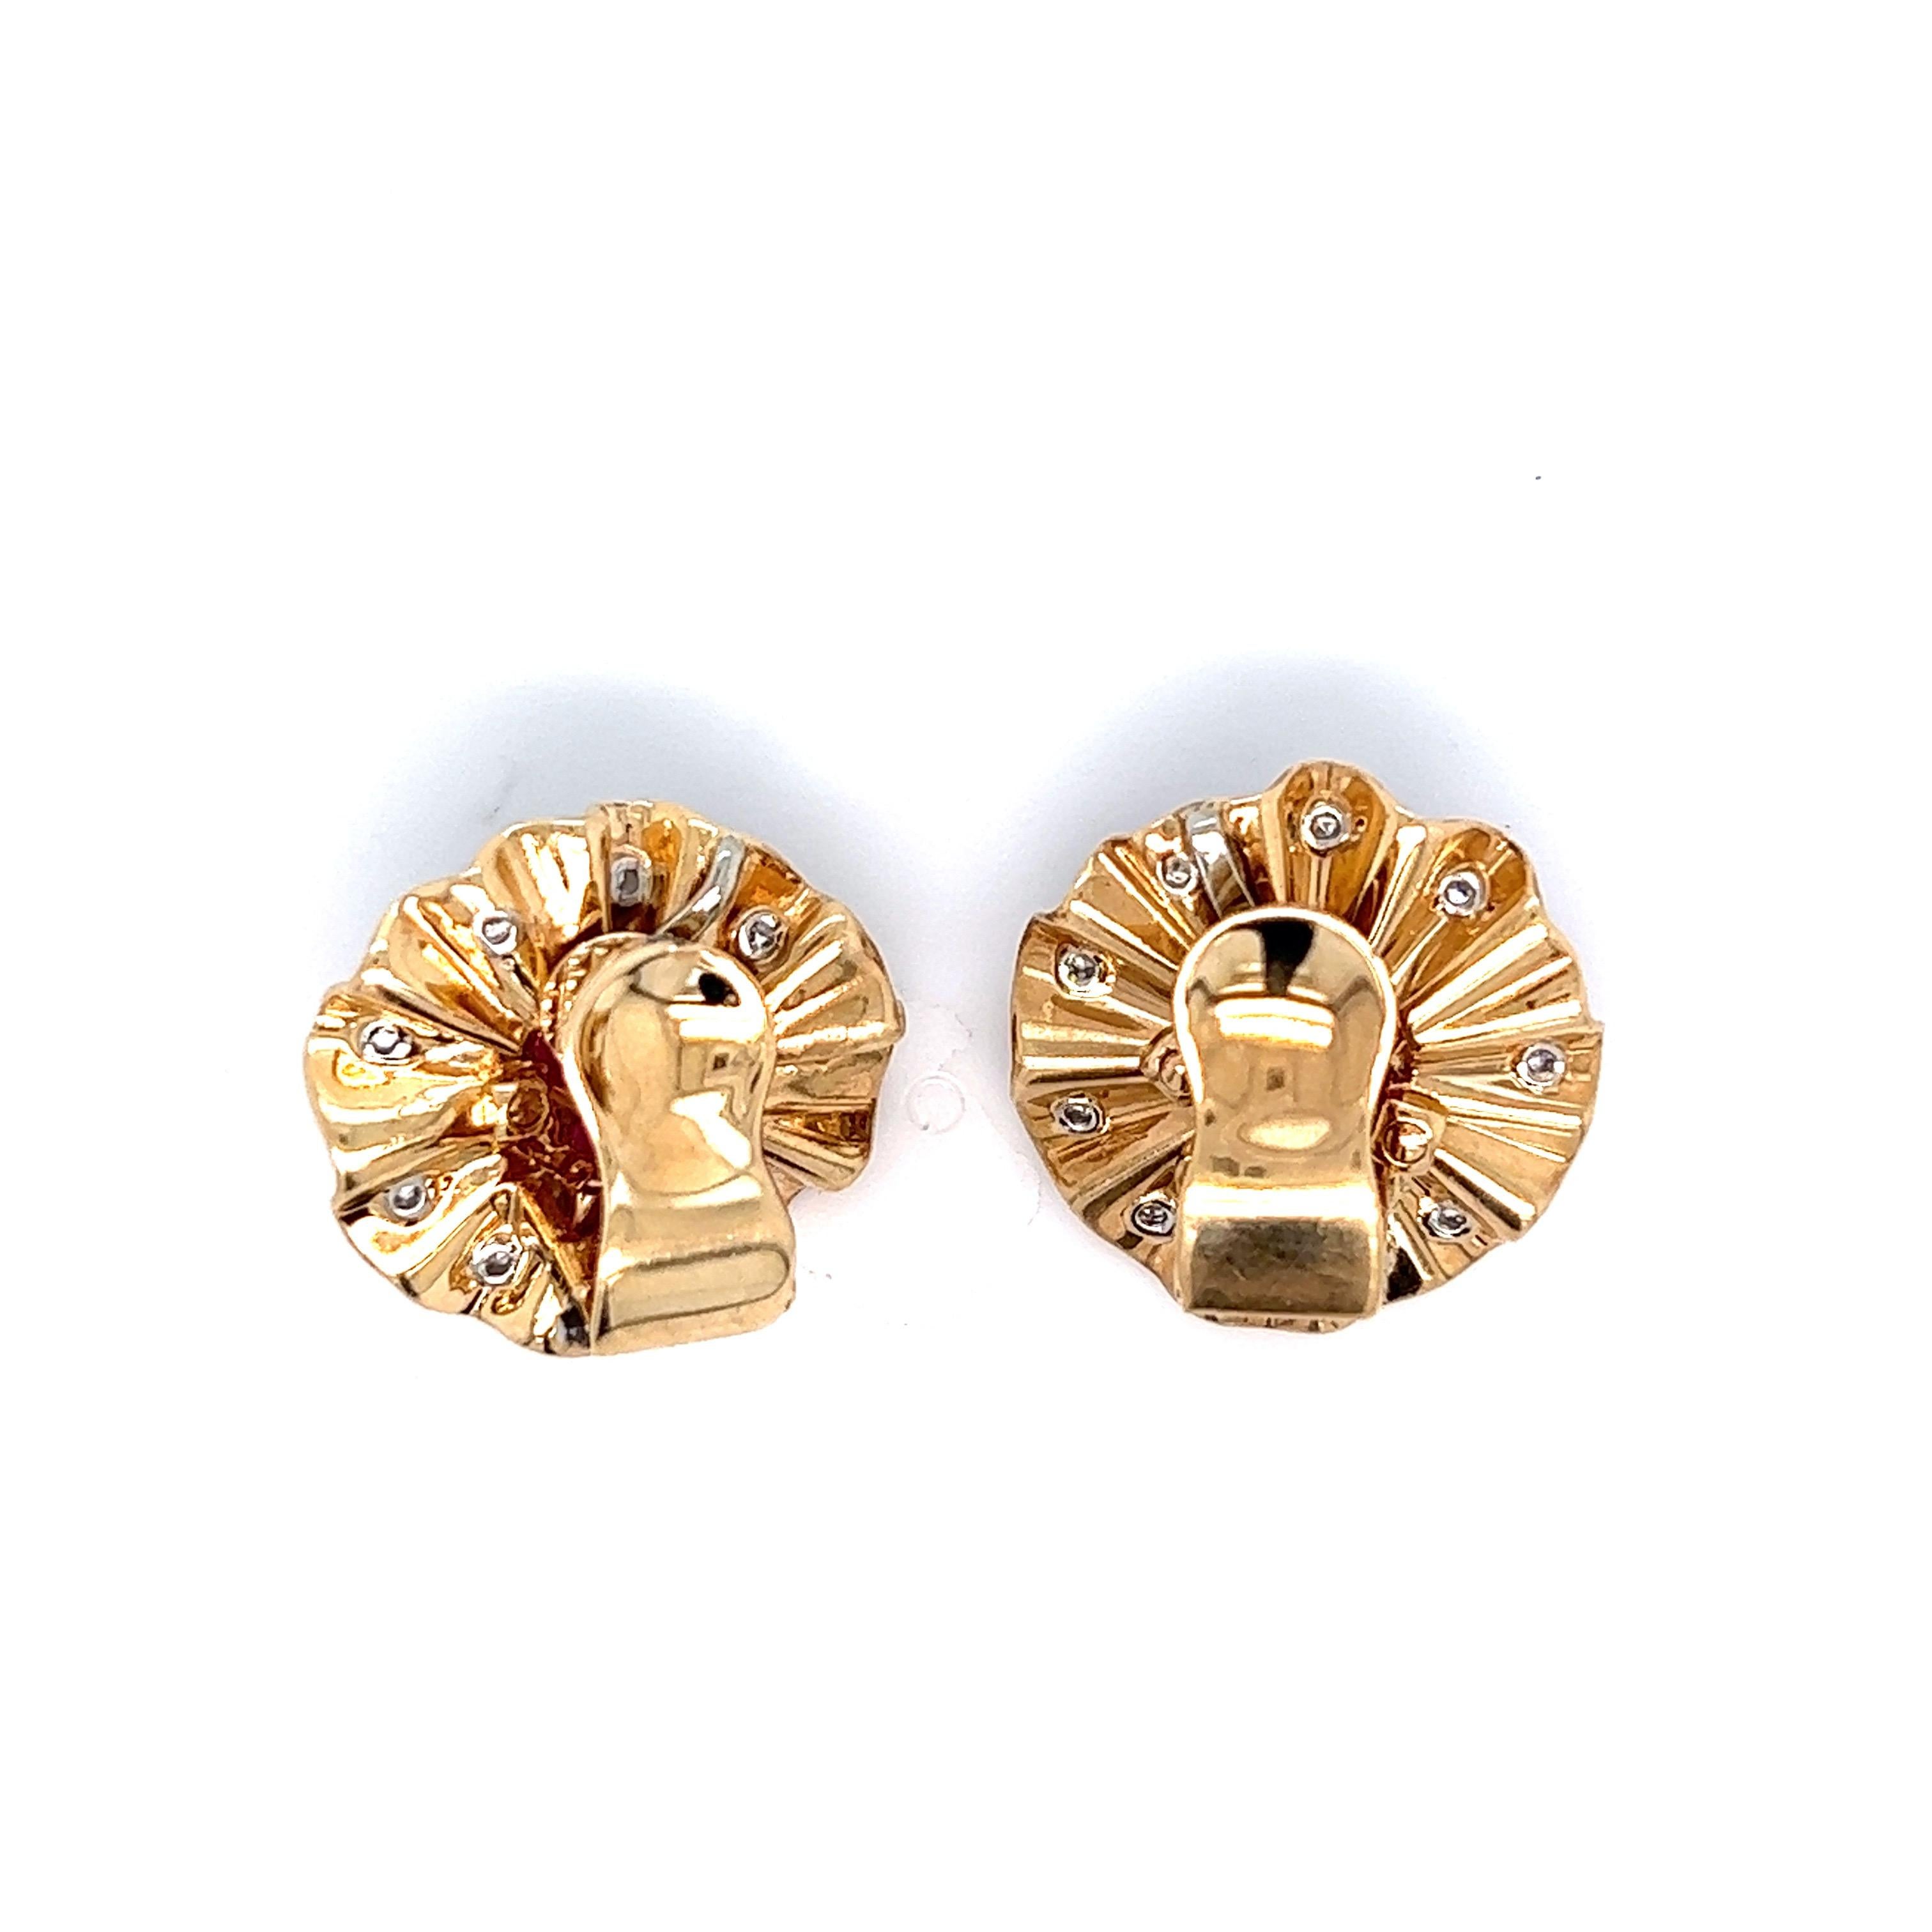 Trabert & Hoeffer Mauboussin 18 karat yellow gold ear clips, marked T&HM

Cabochon rubies of approximately 3 carats, round-cut diamonds of 0.60 carat

Dimensions: width 2 cm, length 2 cm
Total weight: 12.2 grams